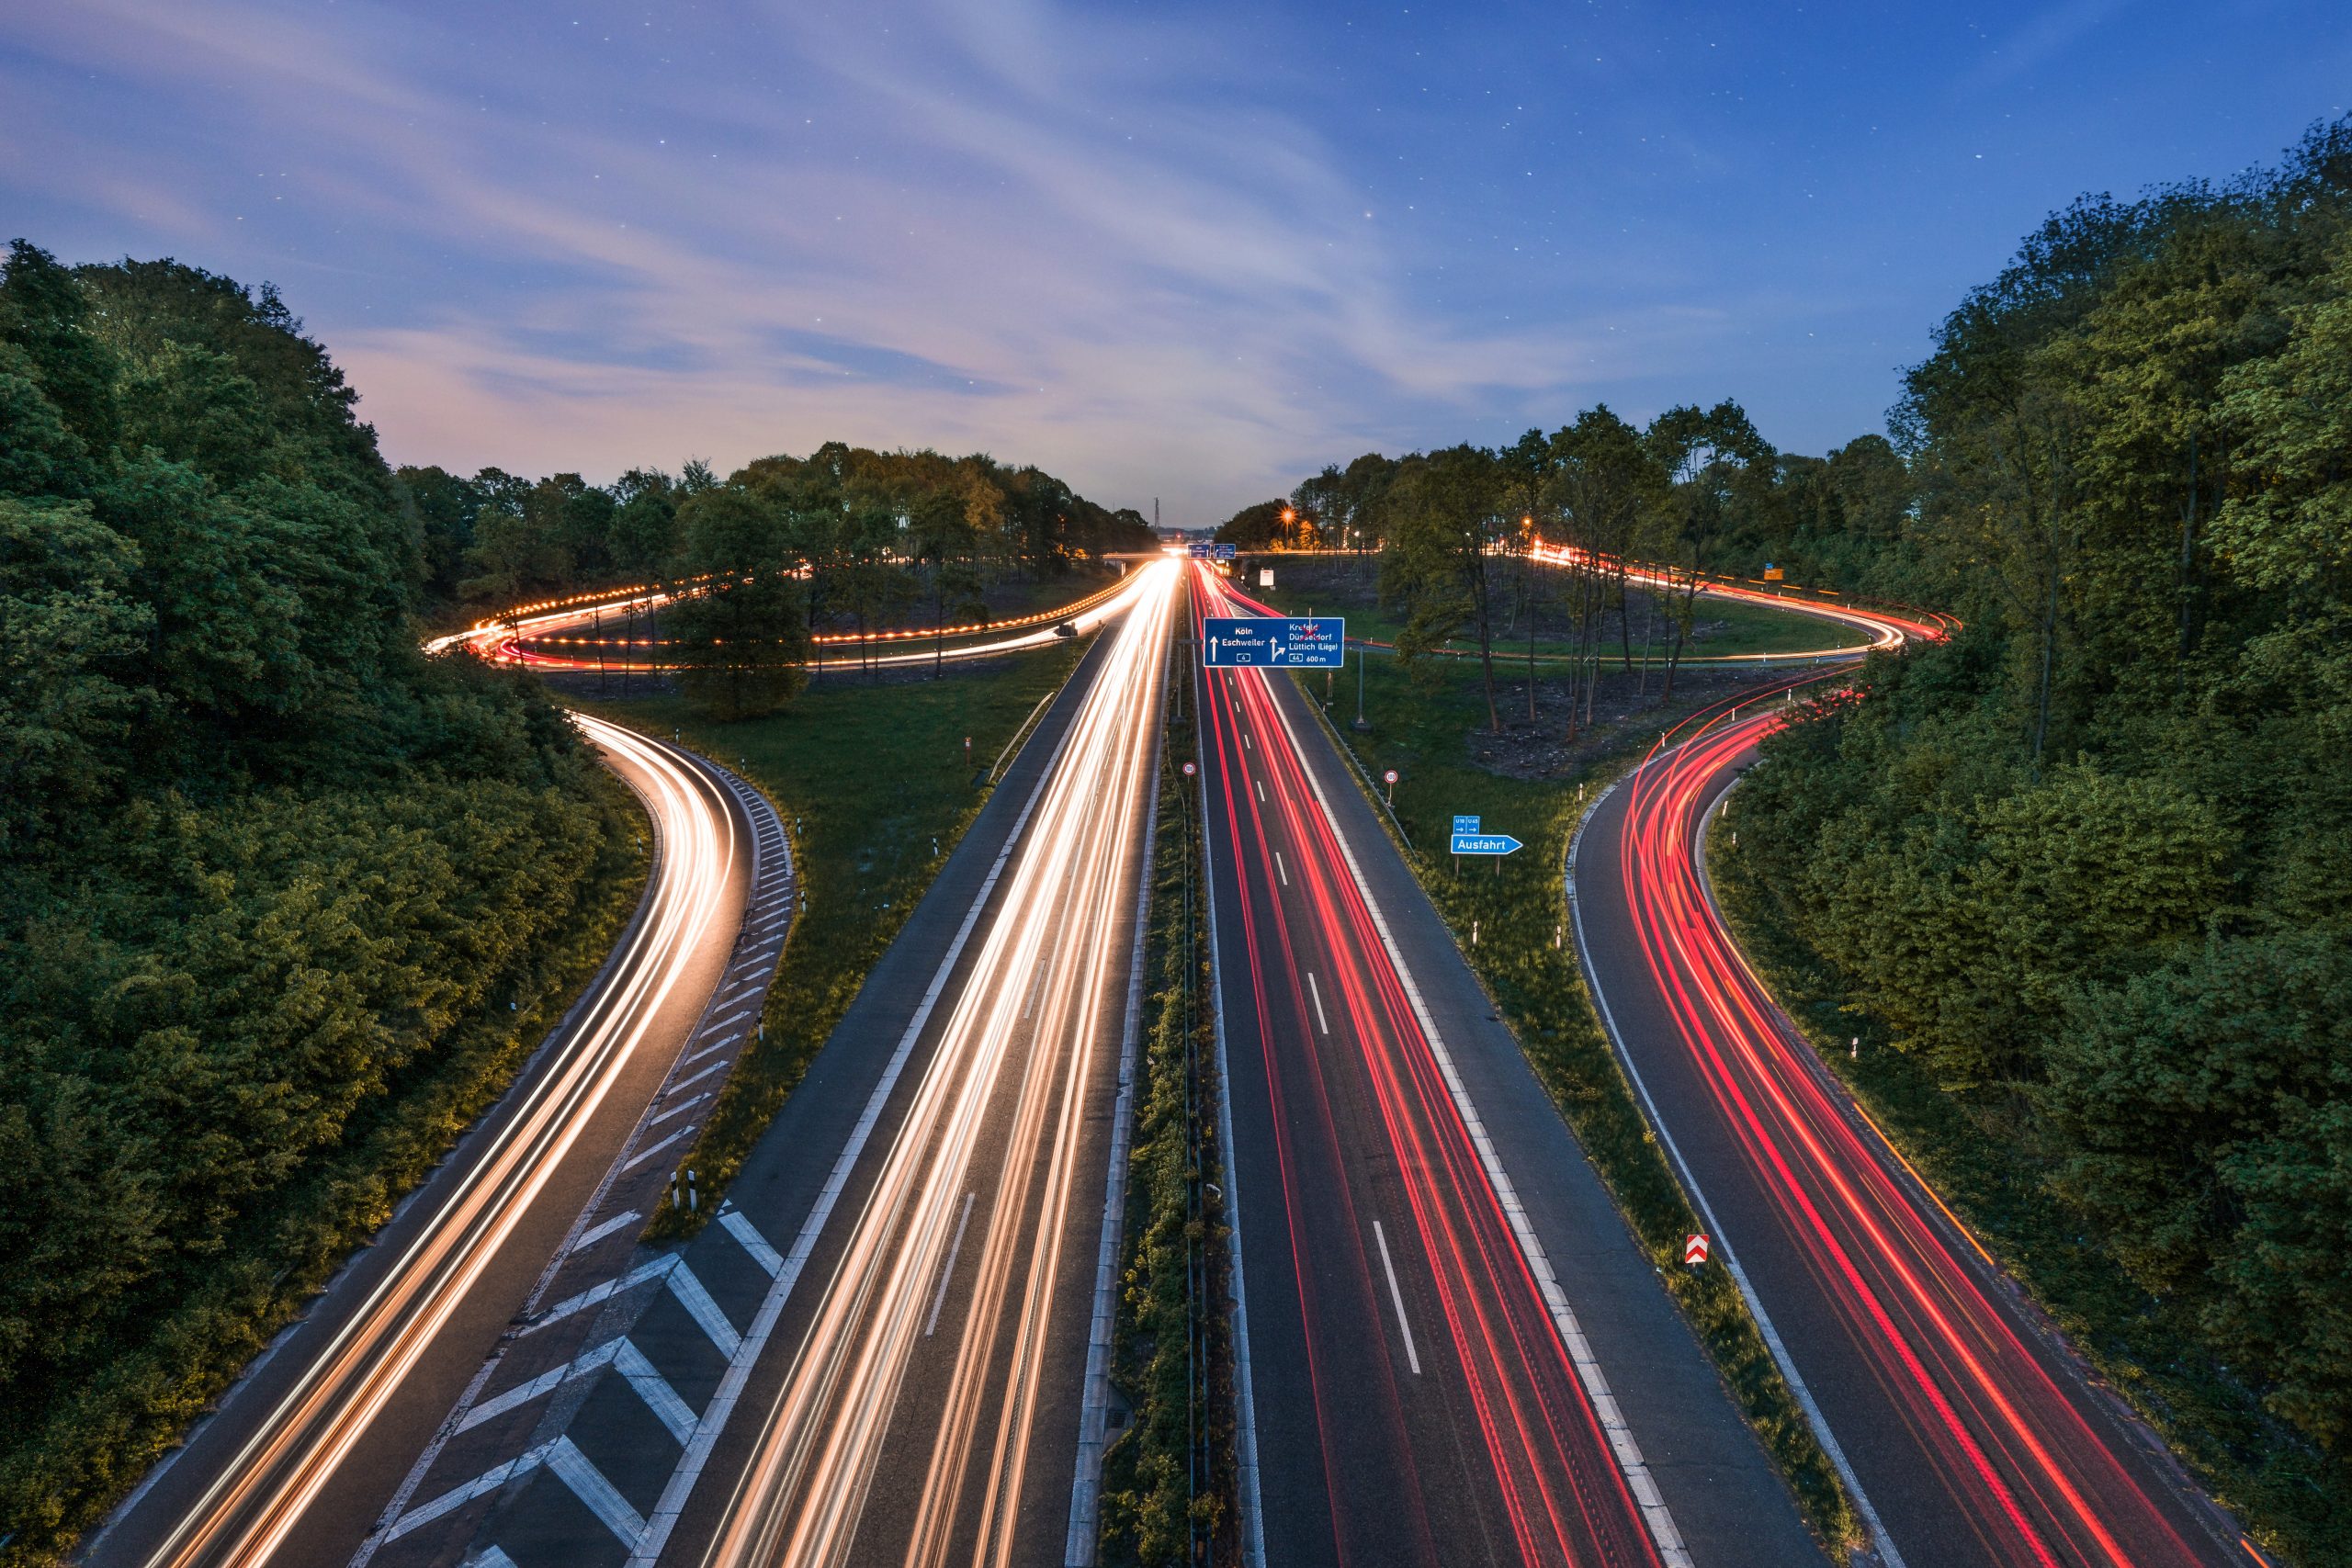 Building material haulage - New motorways with car headlight and brake light streaks